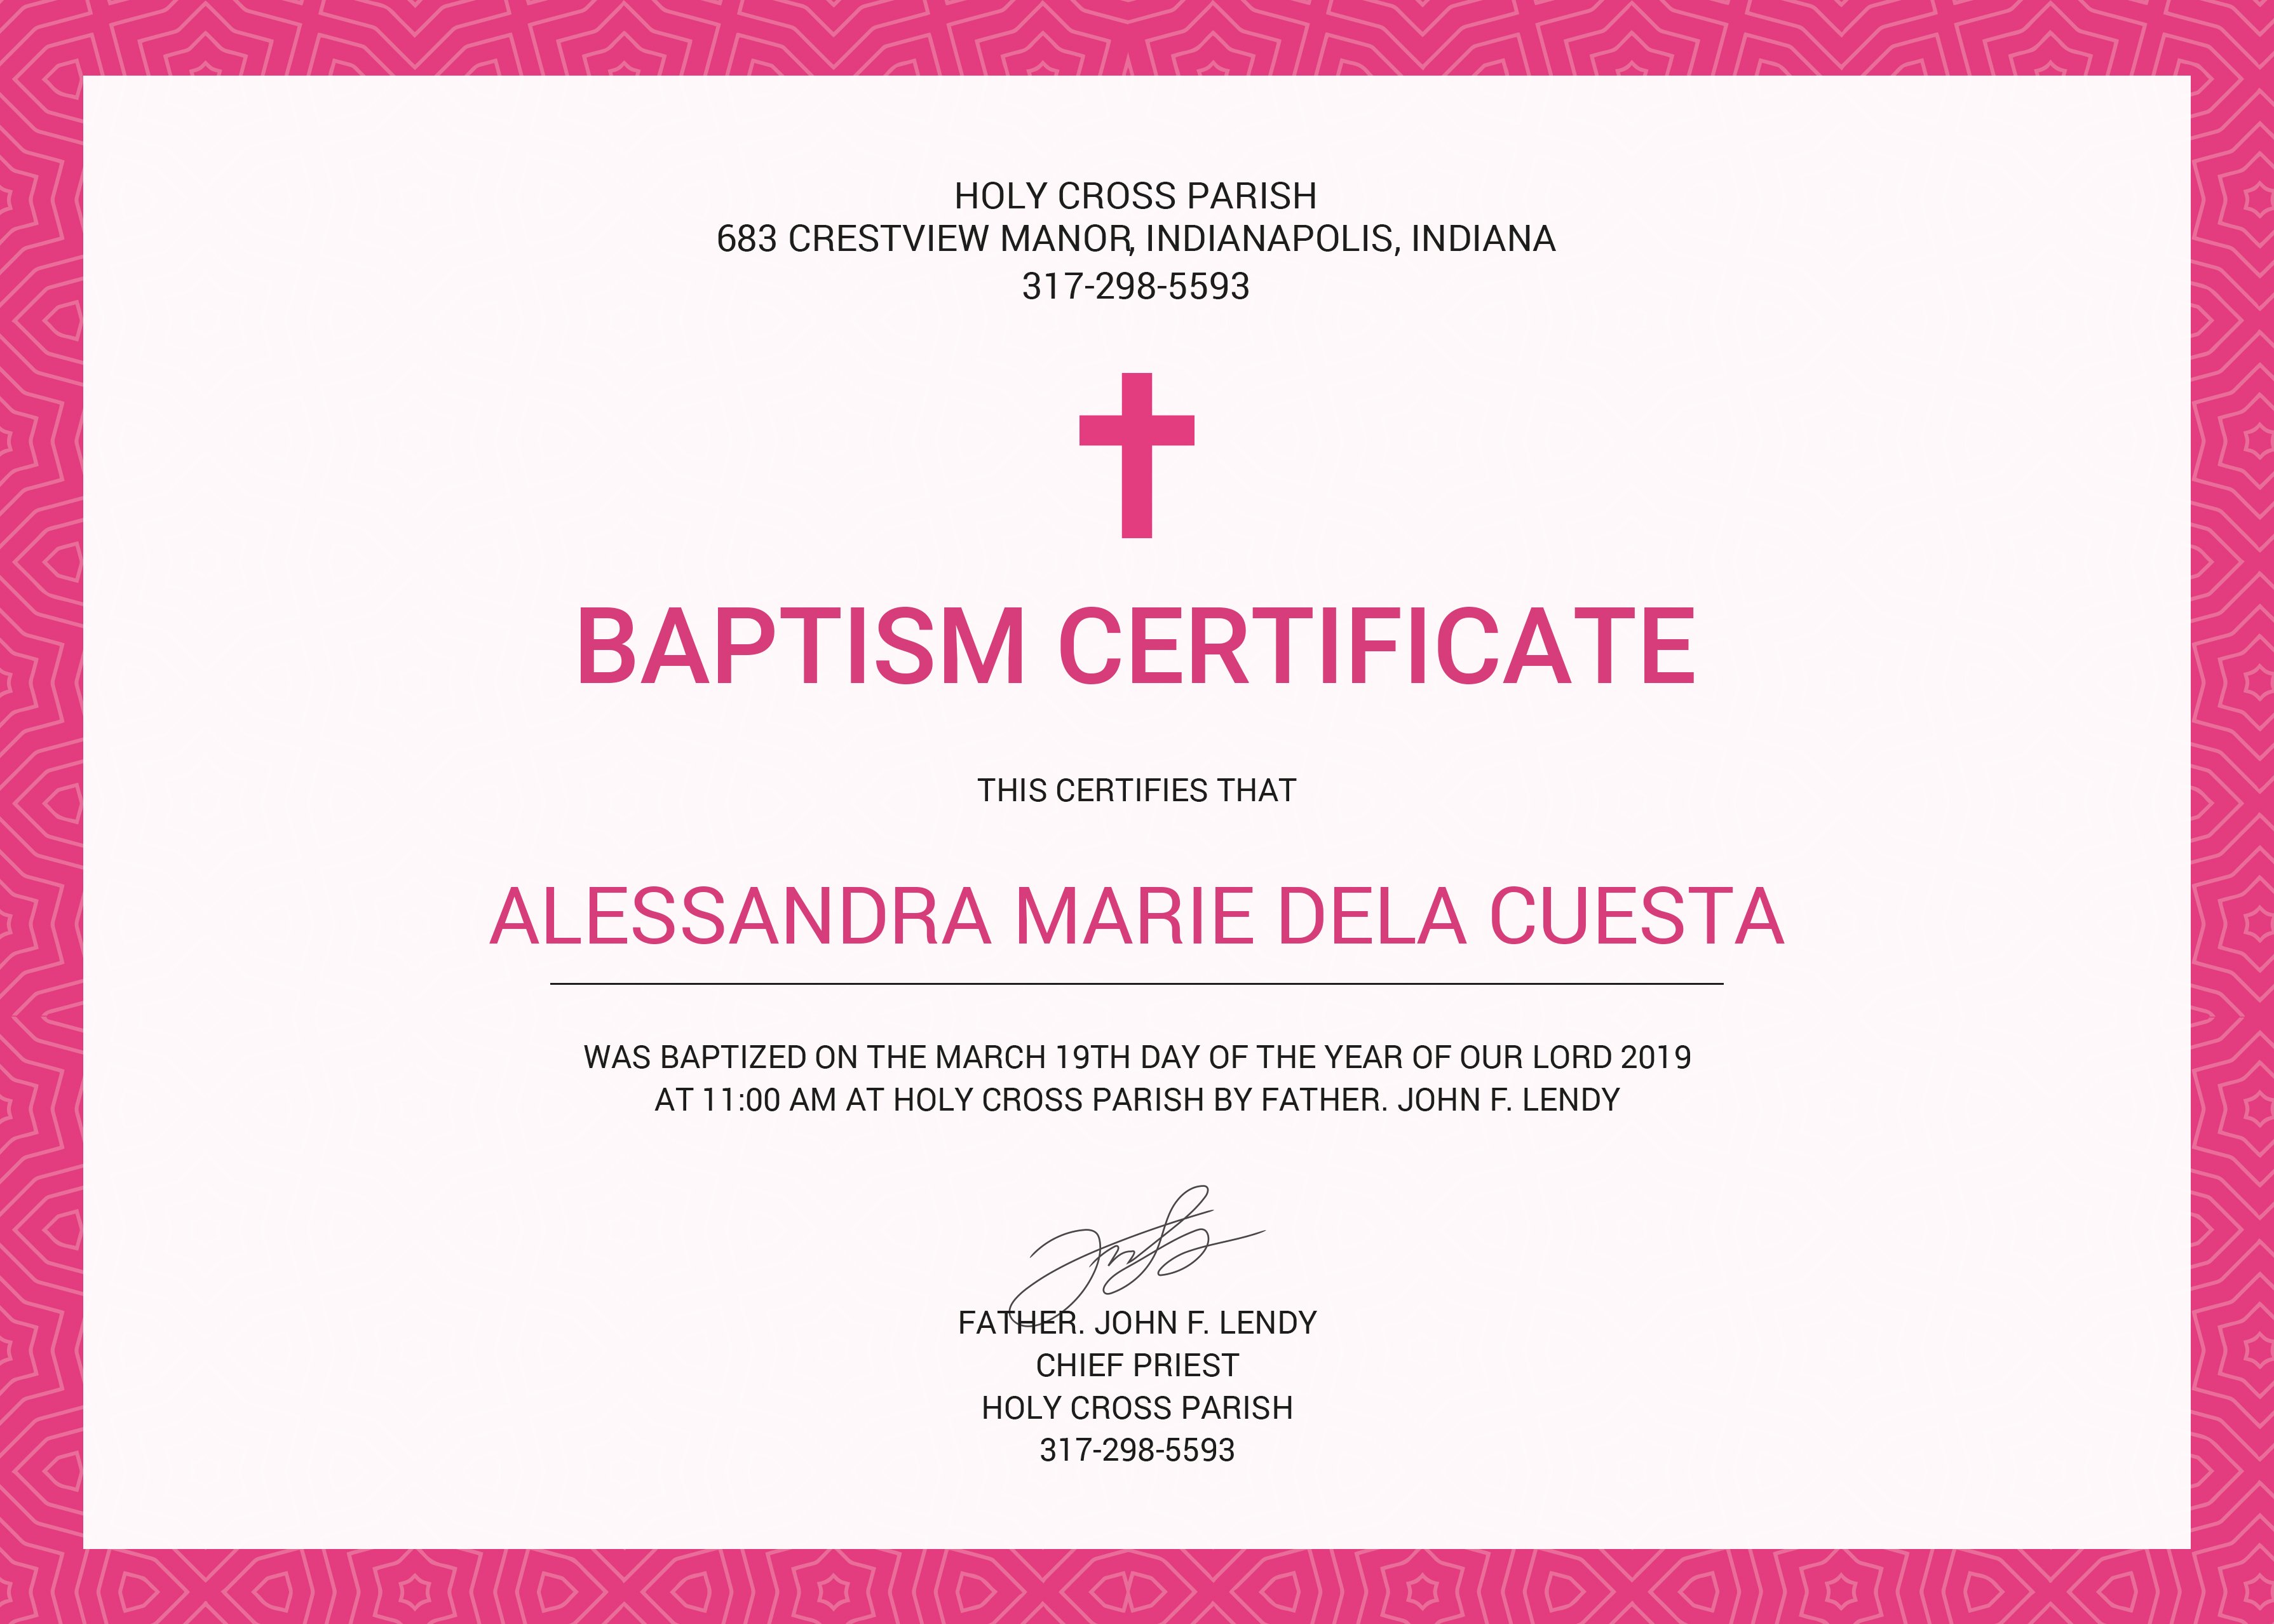 free-baptism-certificate-template-in-psd-ms-word-publisher-illustrator-indesign-apple-pages